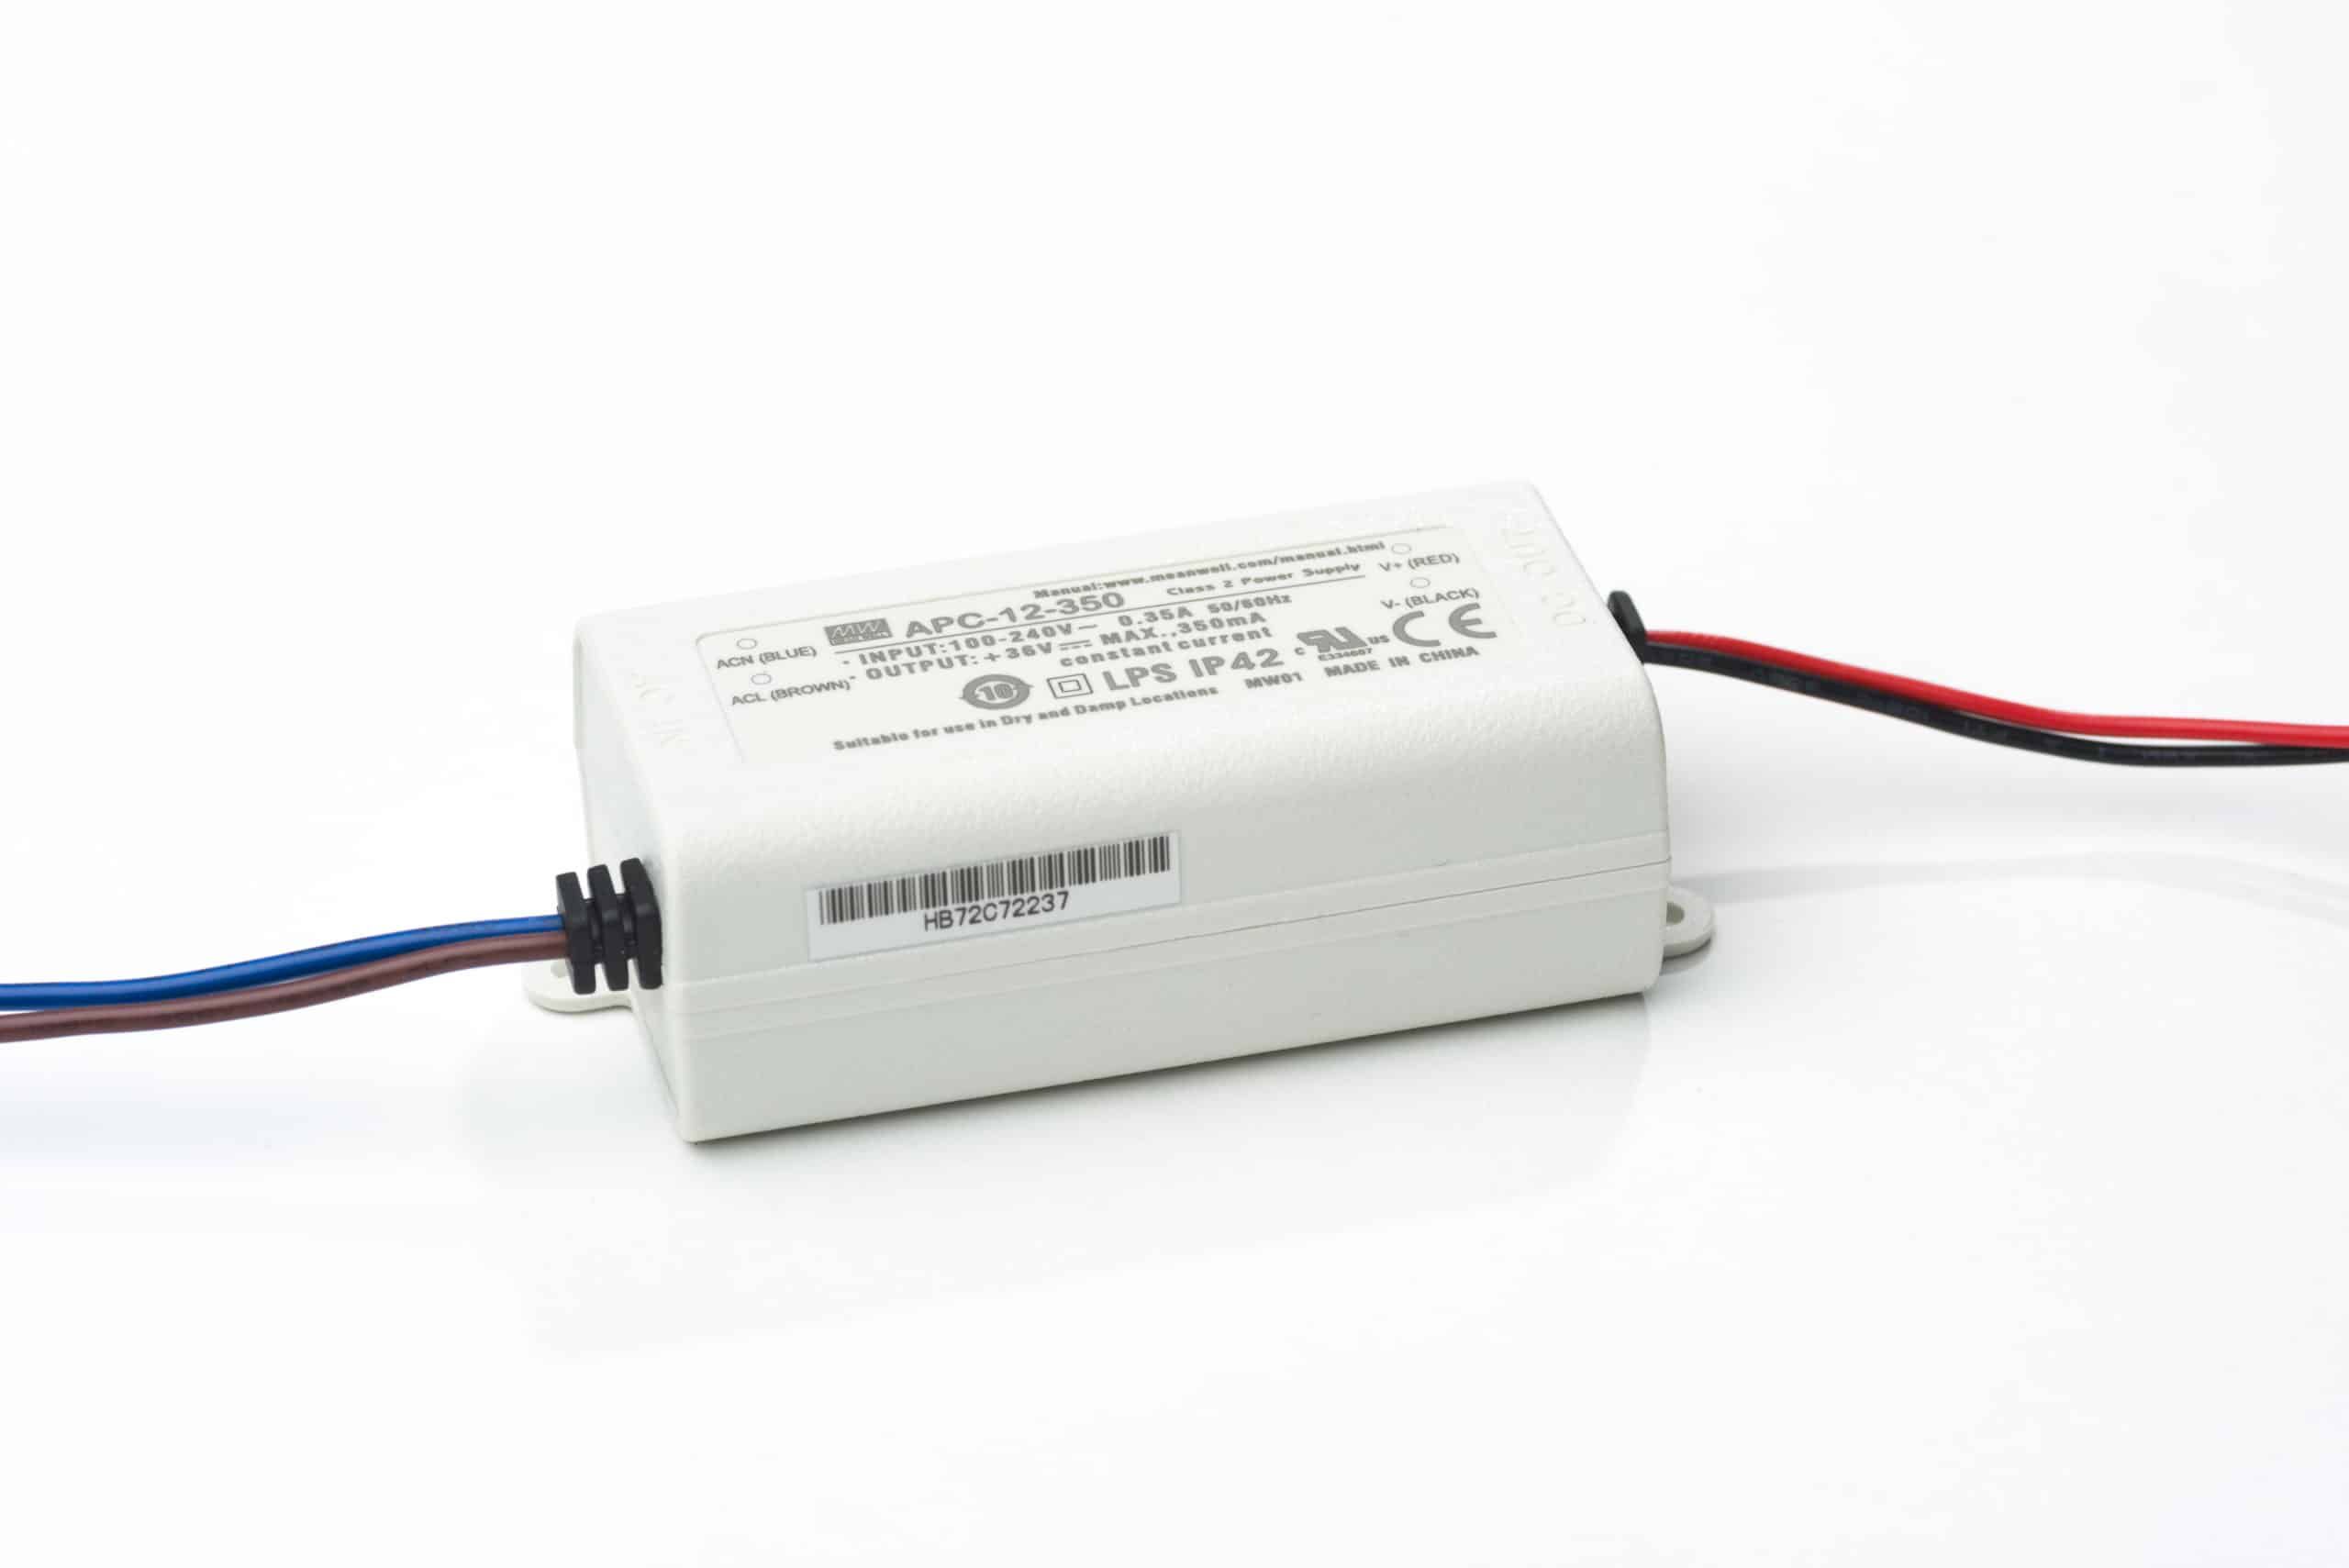 ENGITECHS - APC-12-350 ALIMENTATION NON DIMMABLE IP42